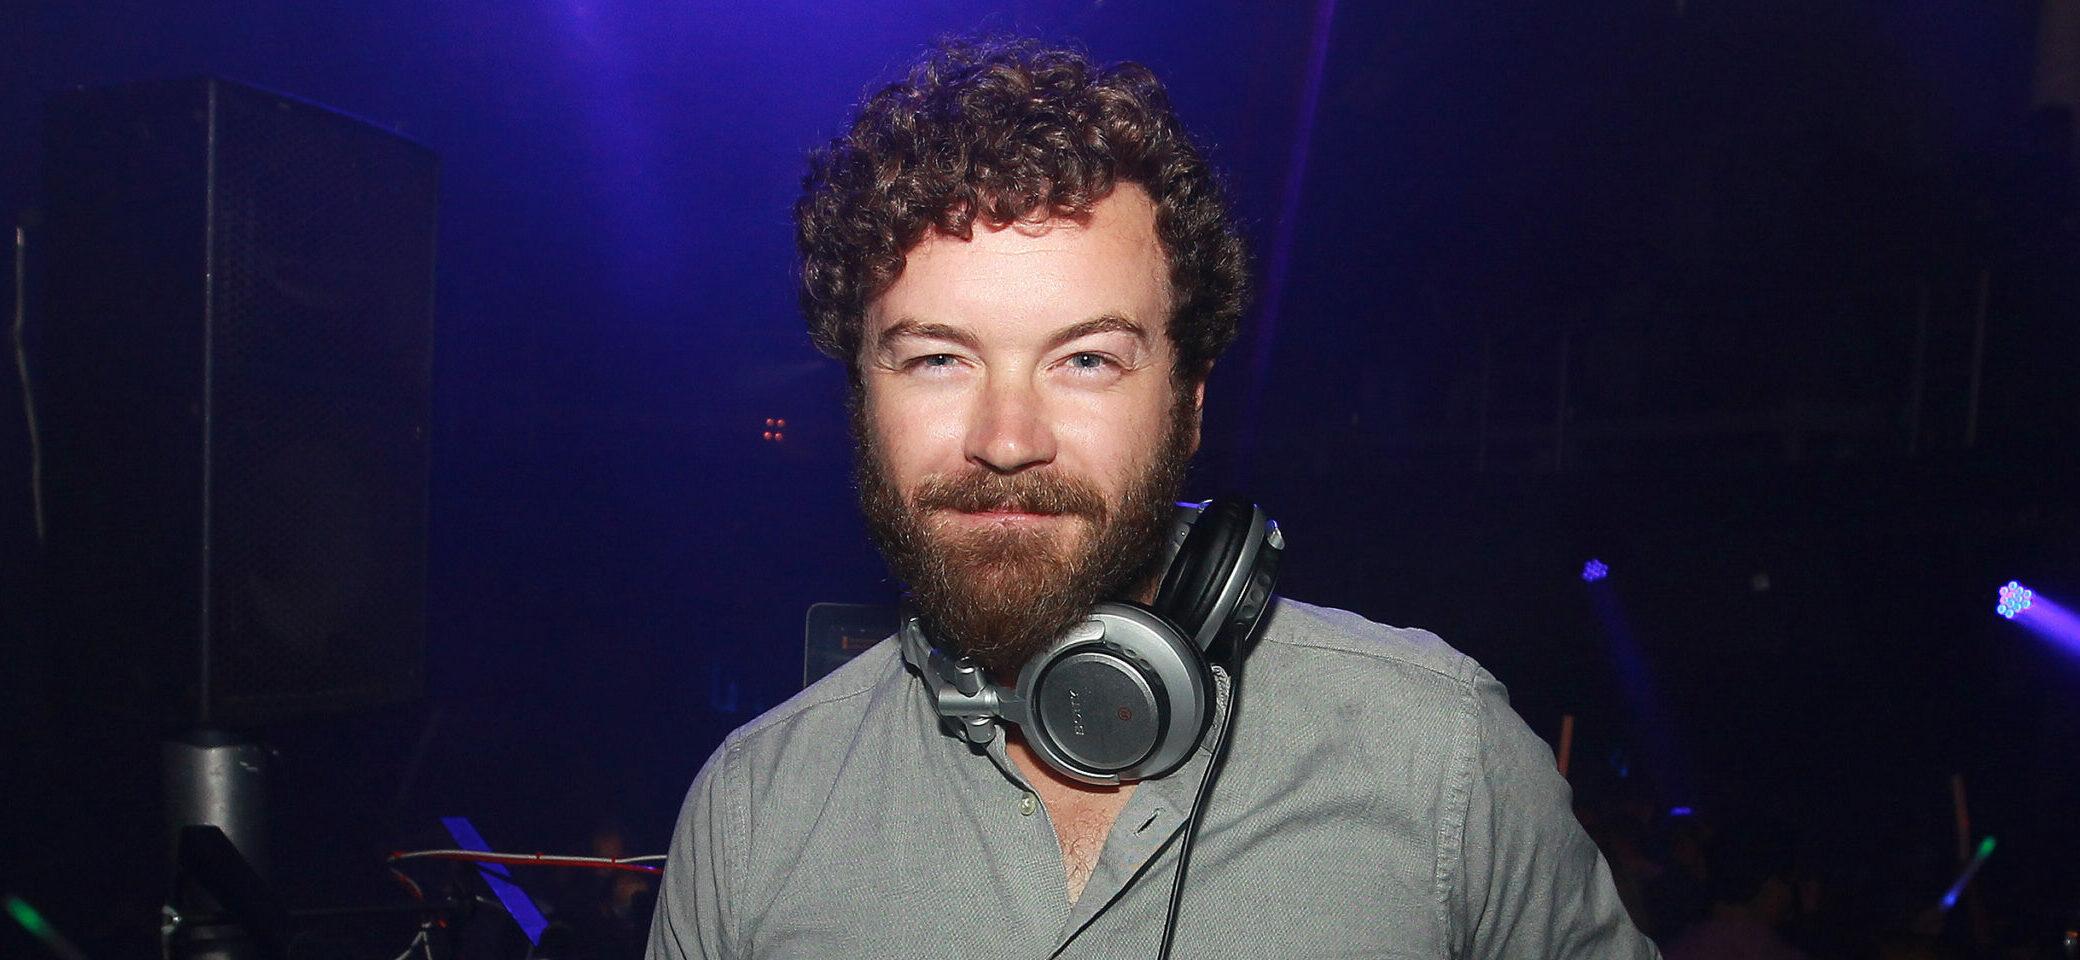 Danny Masterson’s Rape Trial Ends In Mistrial, Leah Remini Speaks Up